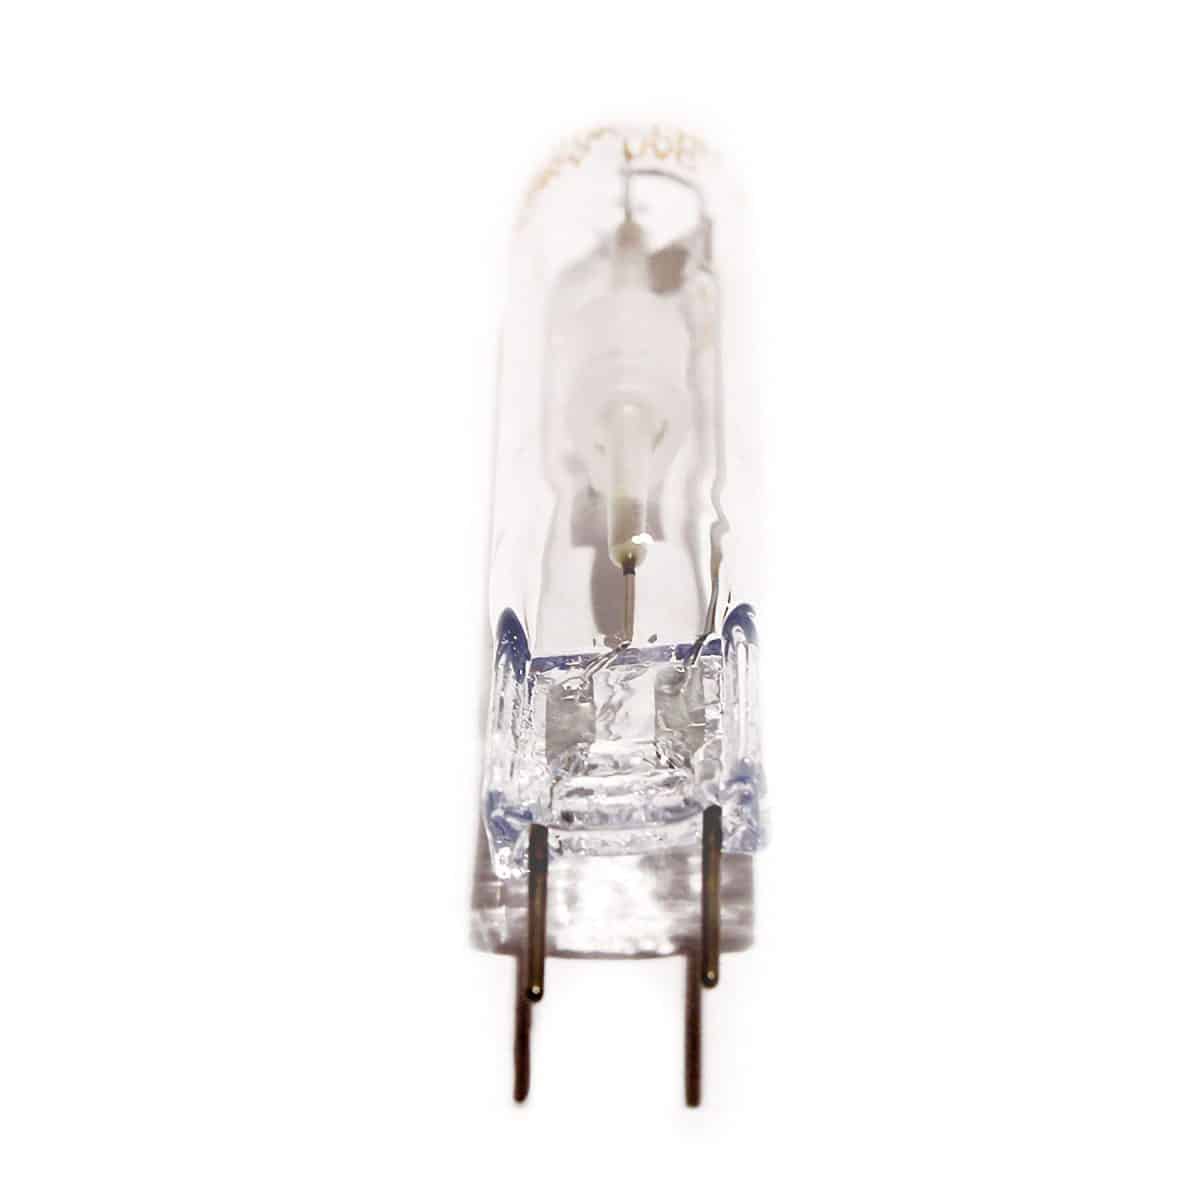 35watt High Intensity Discharge Lamp G8.5 CMH-TC Single Ended Capsule Colour 942 Natural Daylight